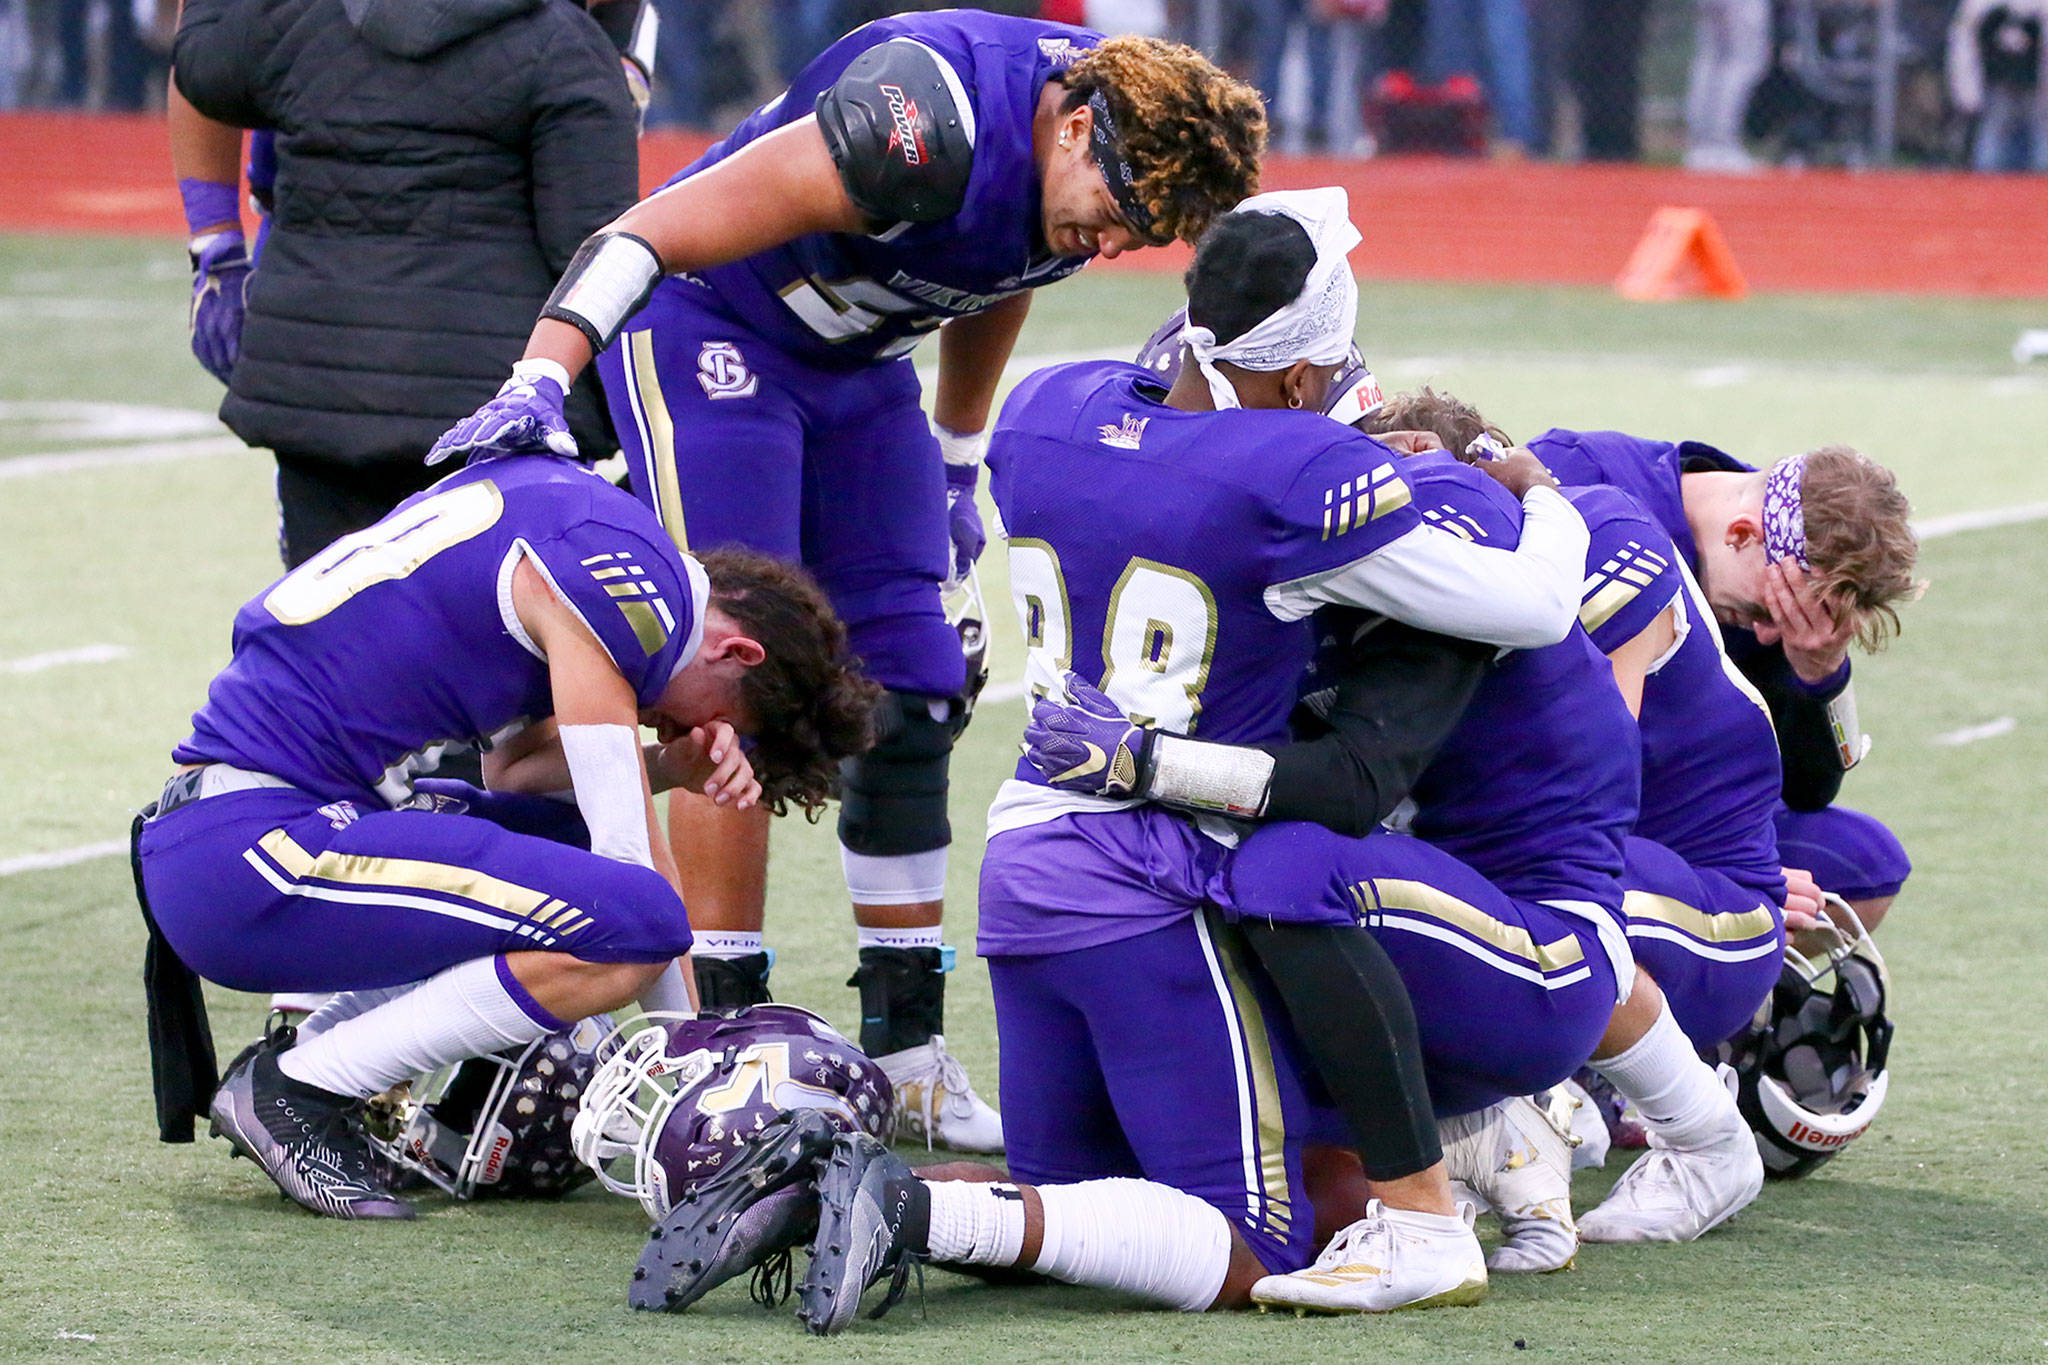 Lake Stevens players comfort one another on the field after the season-ending loss. (Kevin Clark / The Herald)